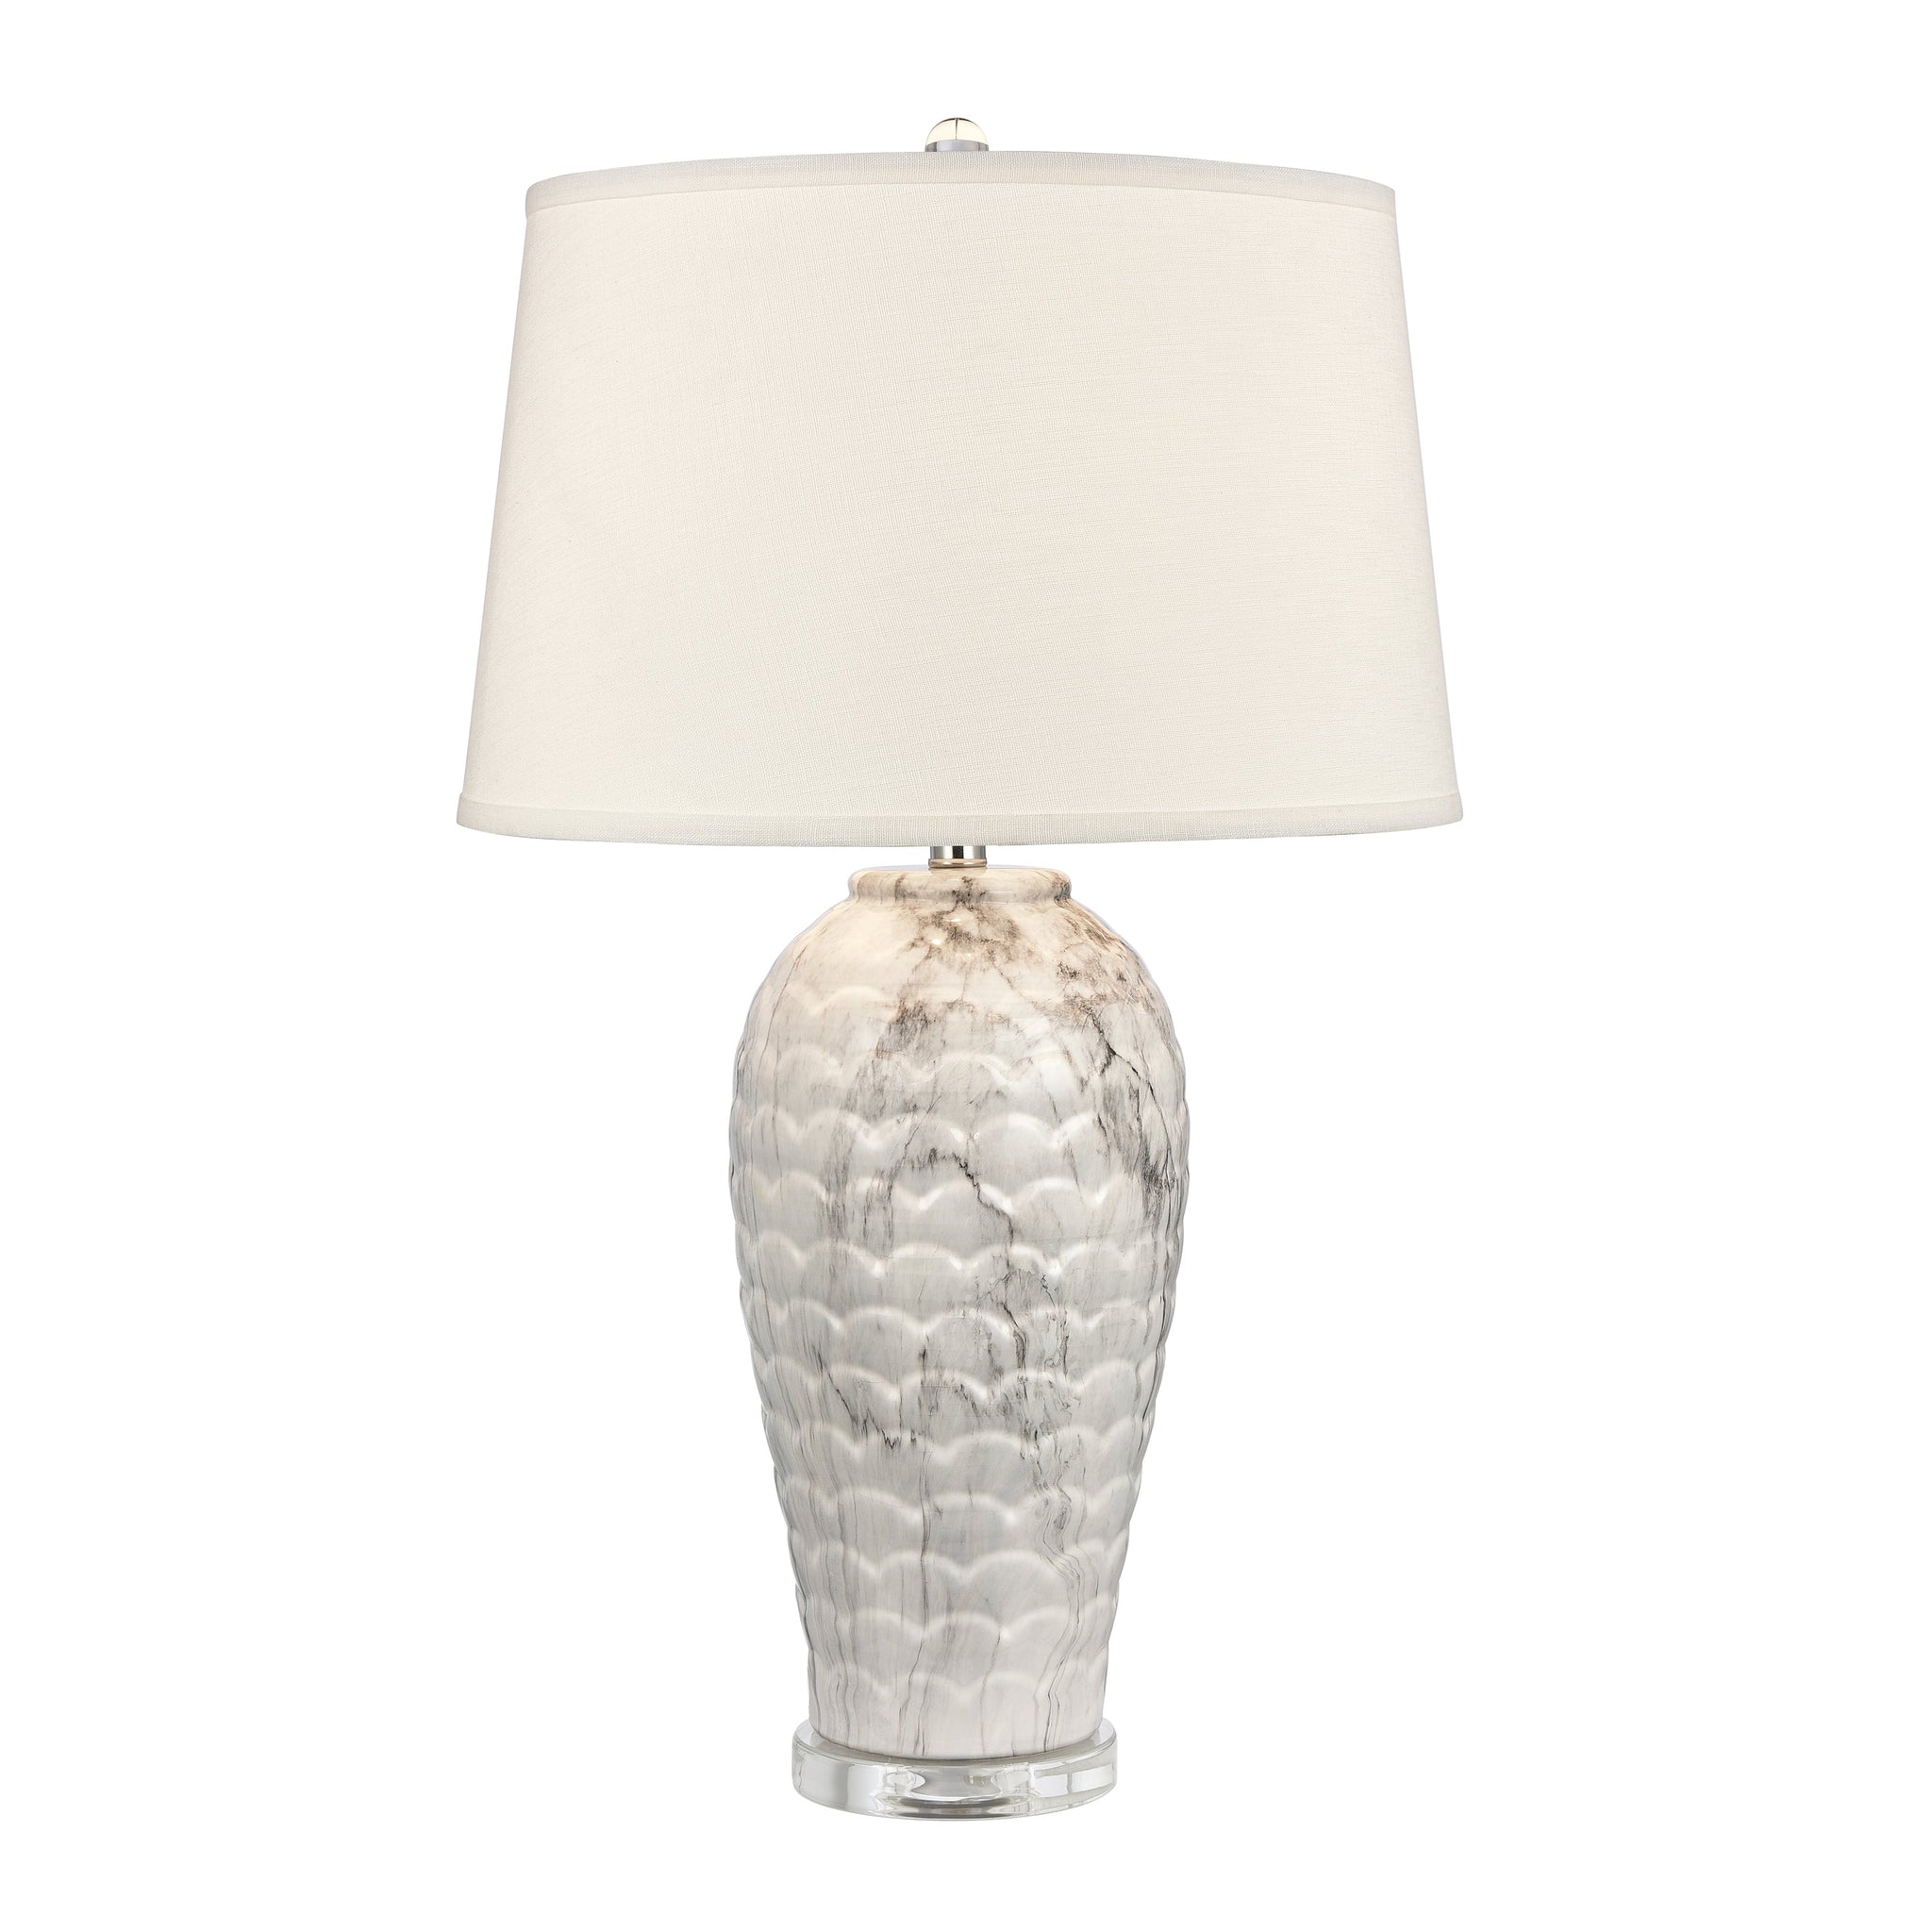 Causeway Waters 31" High 1-Light Table Lamp